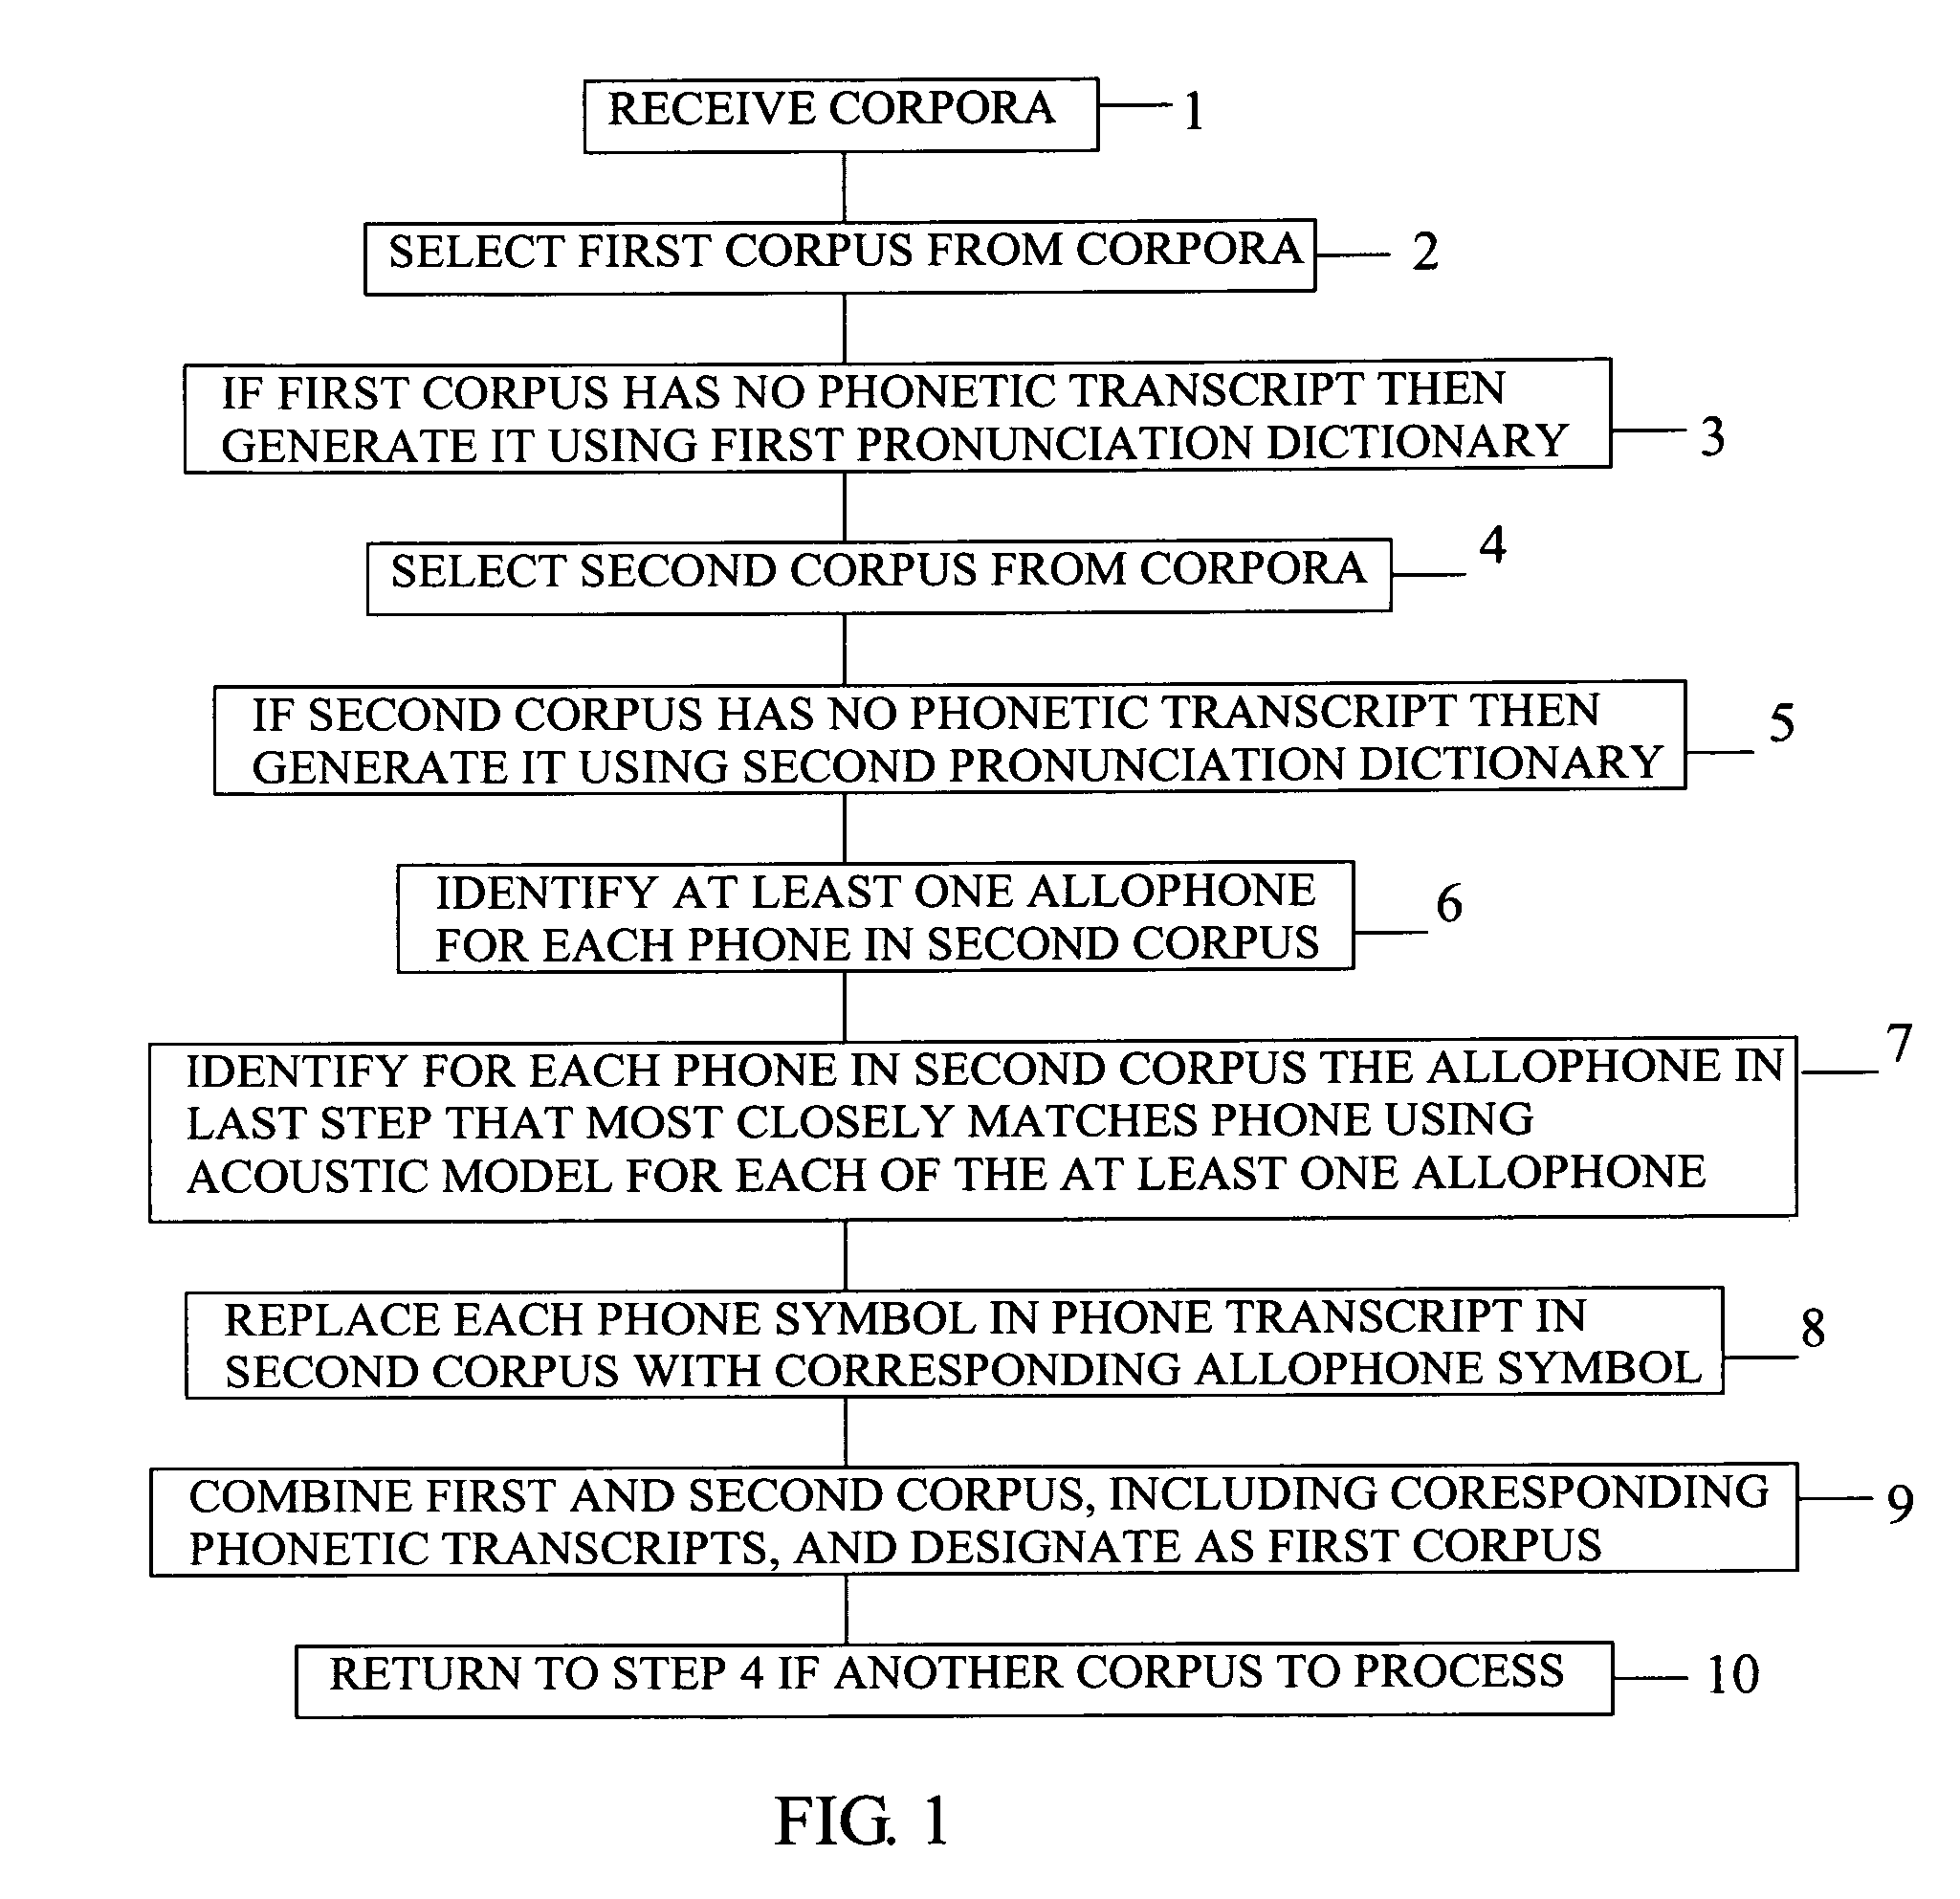 Method of combining corpora to achieve consistency in phonetic labeling